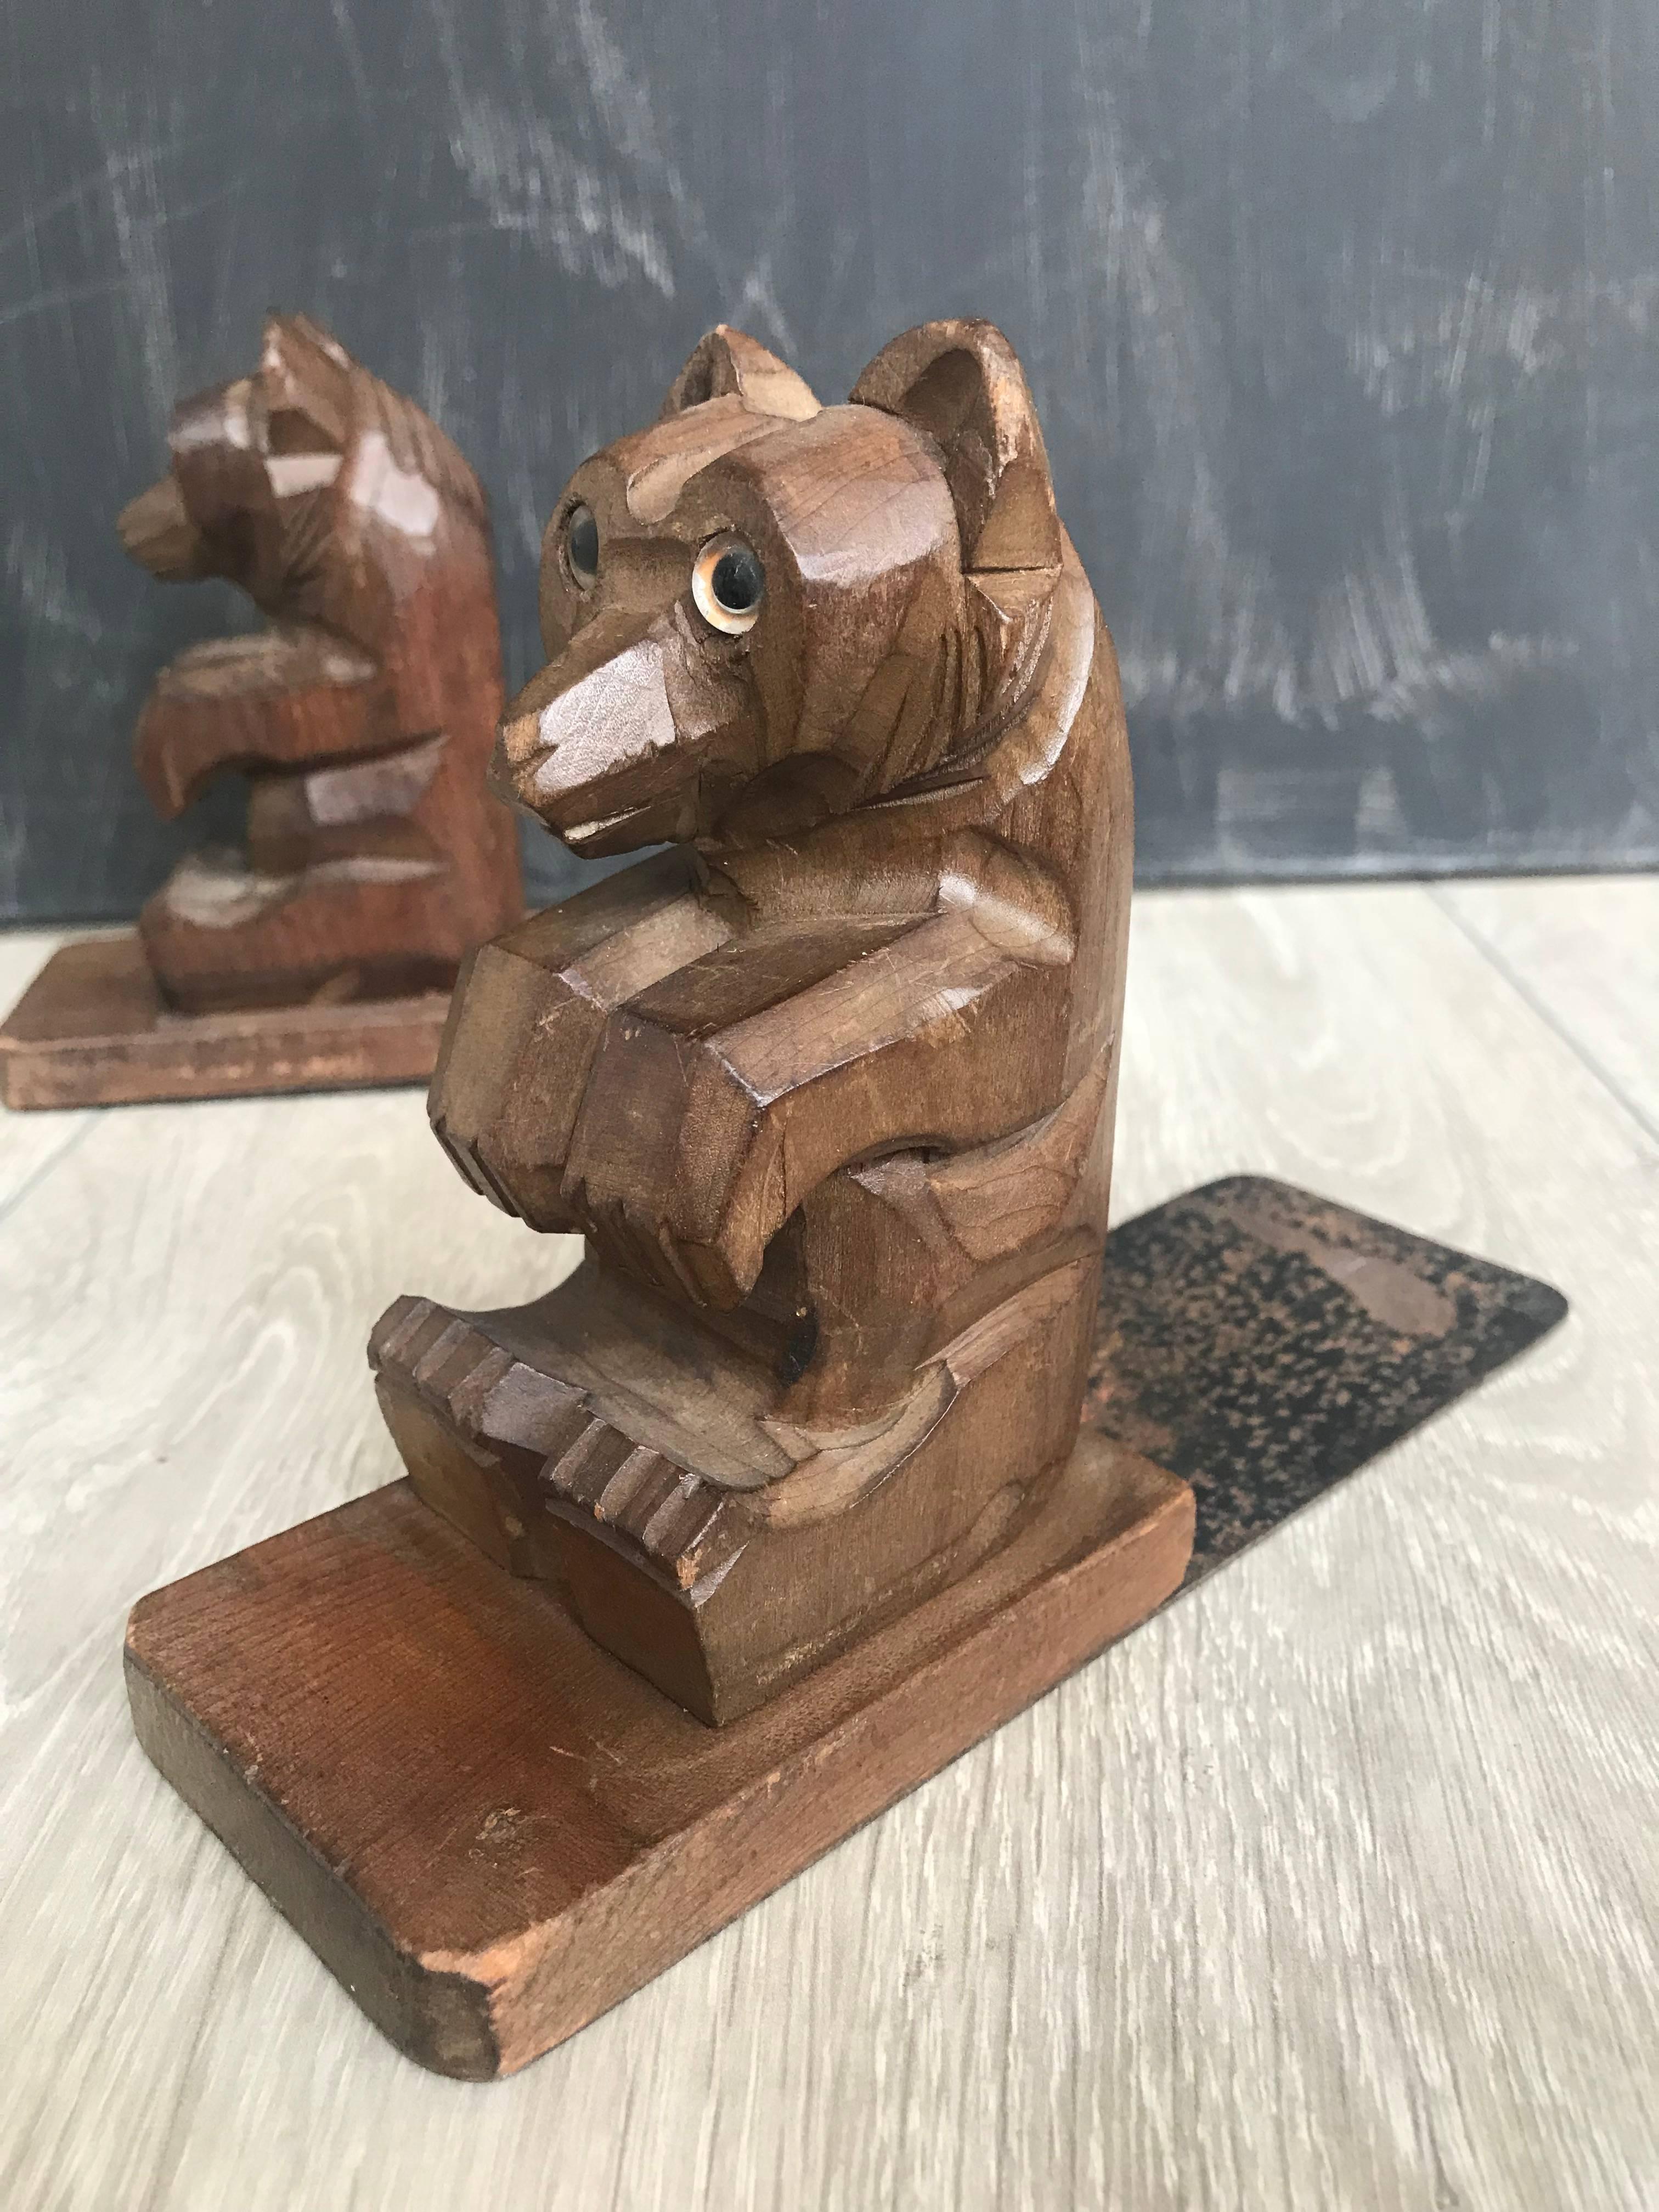 European Highly Decorative Pair of Hand-Carved Art Deco Era, Wooden Sitting Bear Bookends For Sale